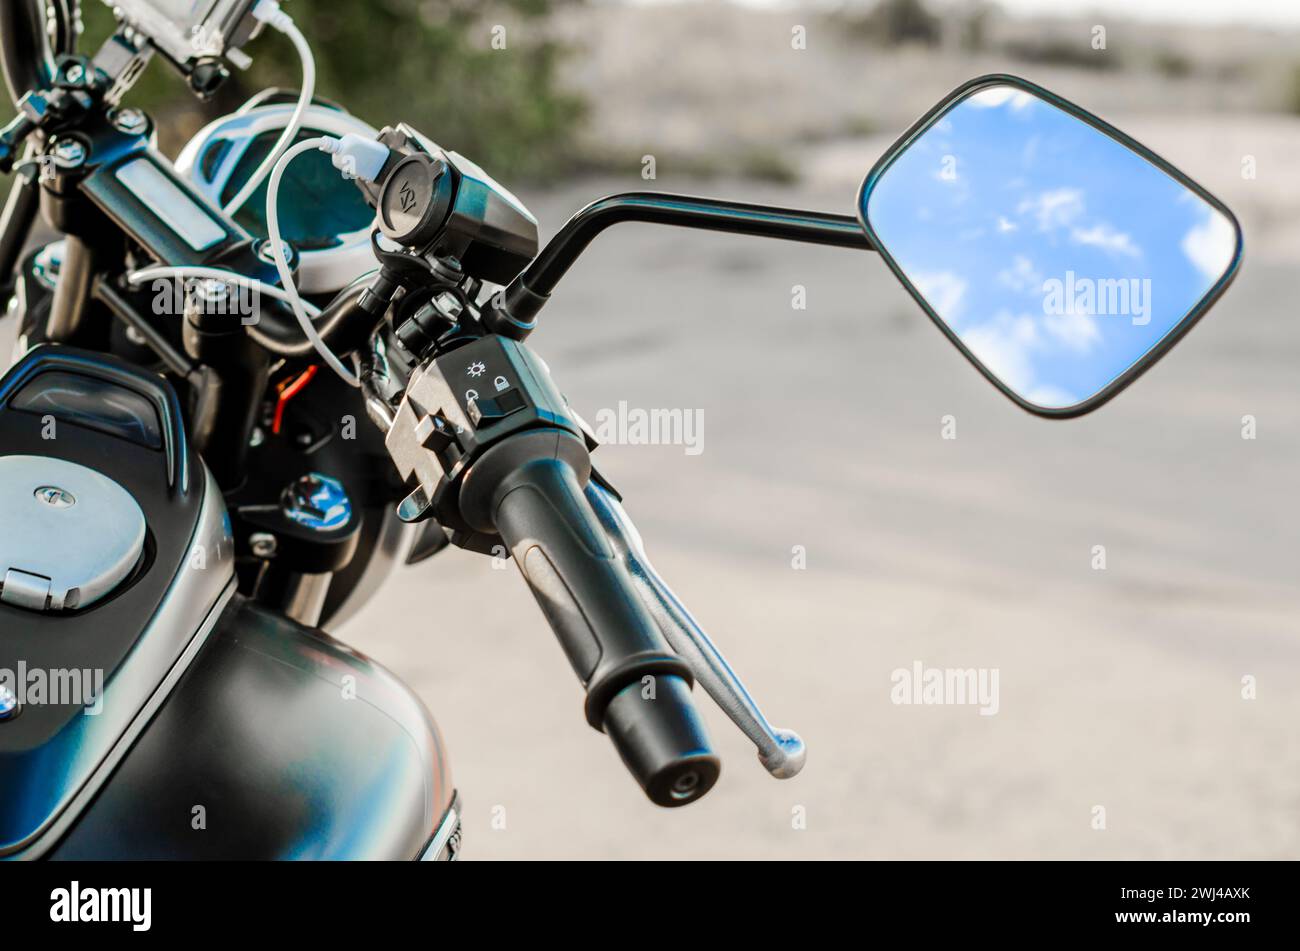 Reflection of the nab and clouds in the motorcycle mirror, motorcycle steering wheel and motorcycle fuel tank Stock Photo